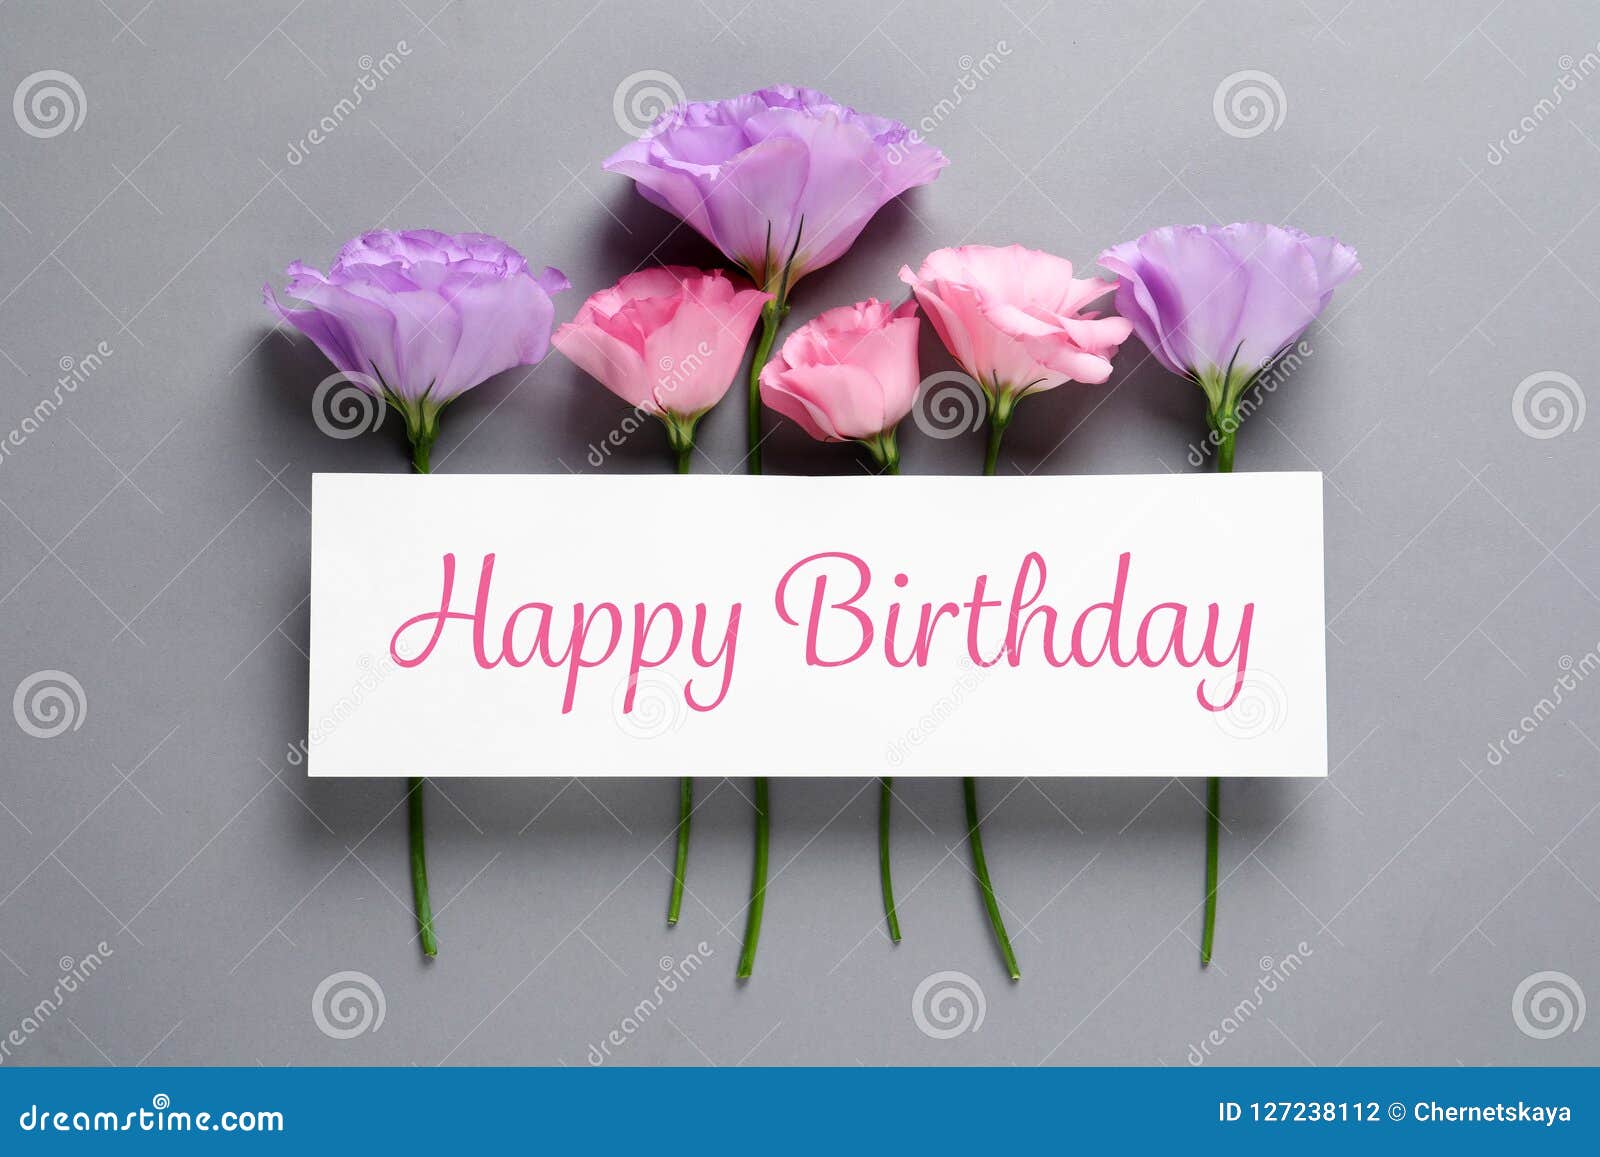 Flat Lay Composition Of Eustoma Flowers And Card With Greeting Happy Birthday Stock Photo Image Of Blossom Object 127238112